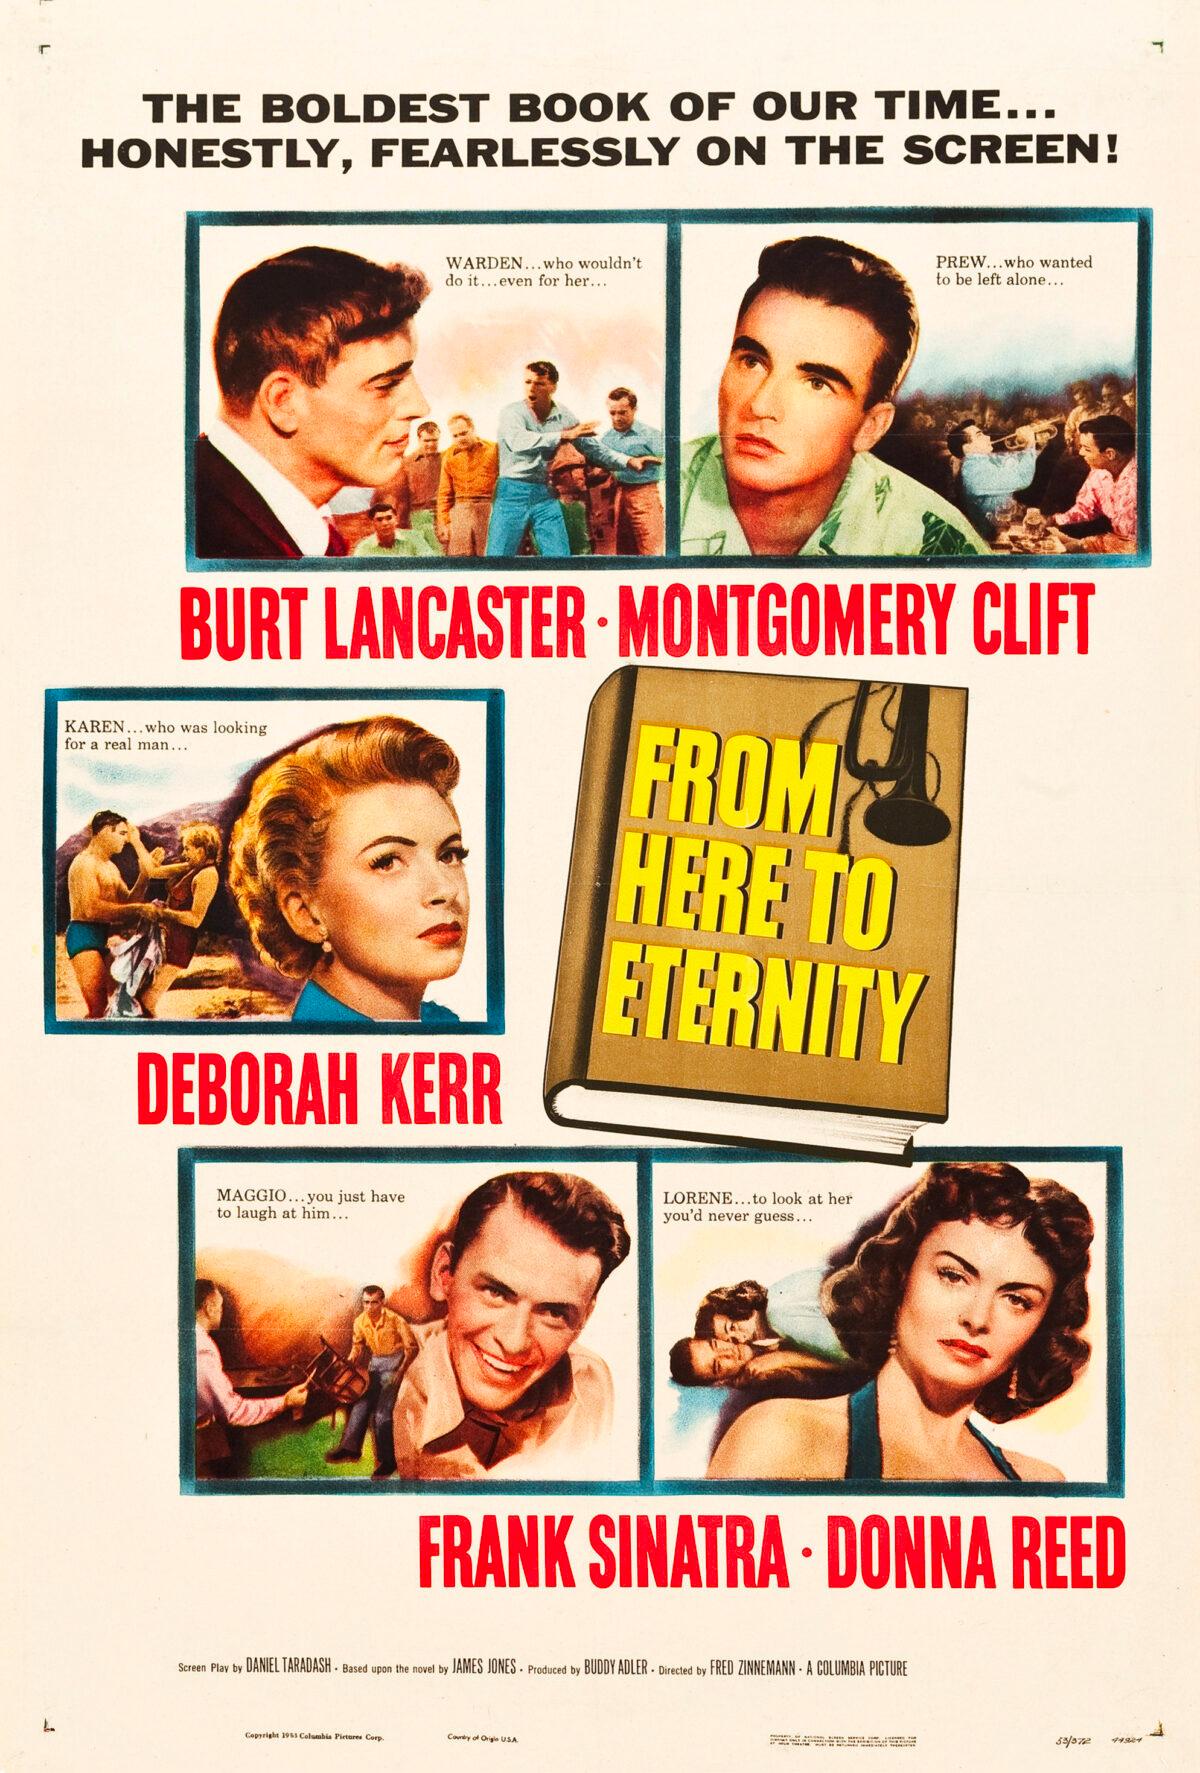 “From Here to Eternity” was the big winner at the 1954 Academy Awards. (Columbia Pictures Corporation)